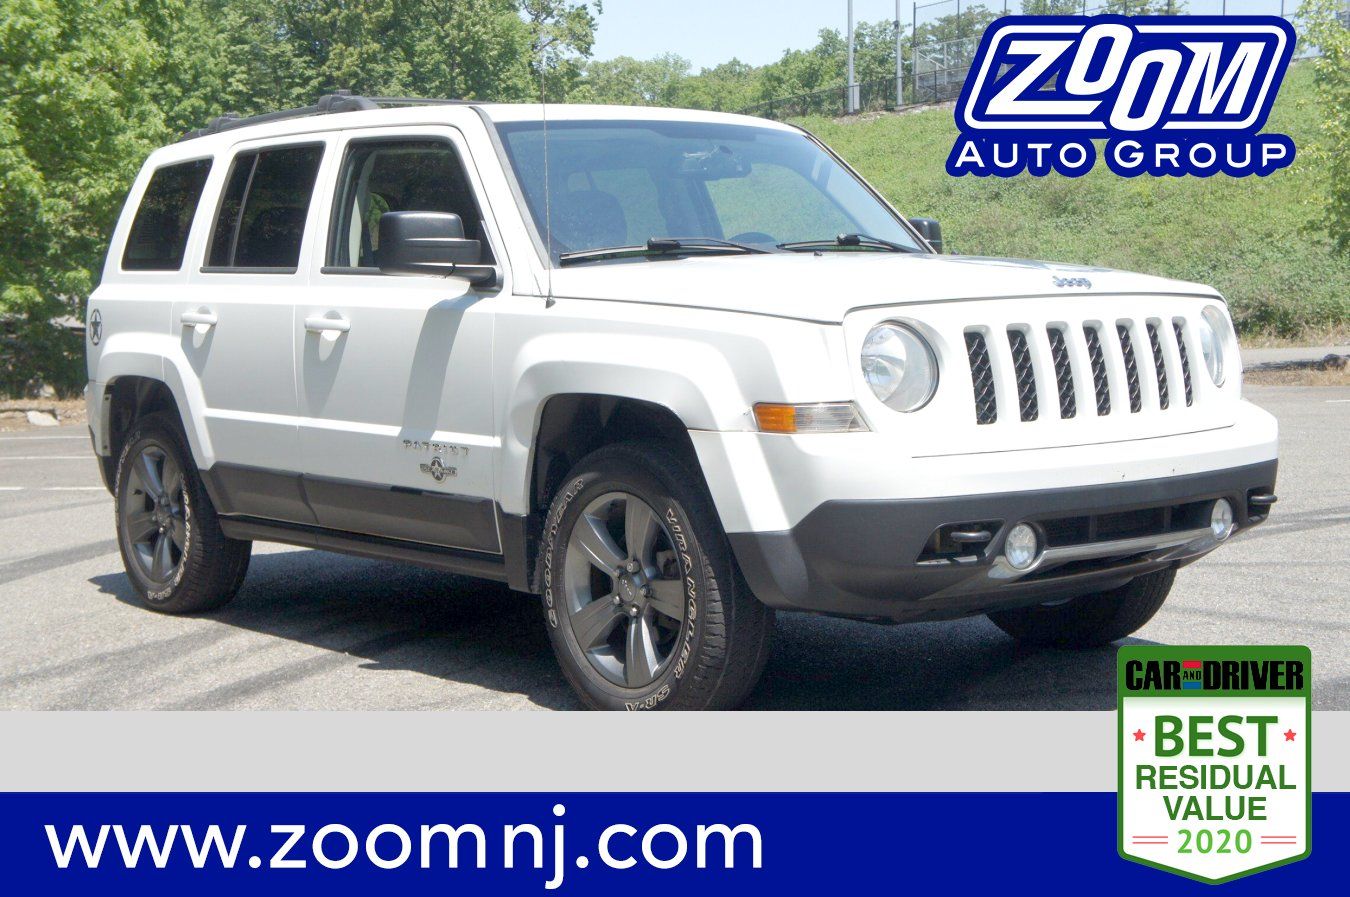 2014 Jeep Patriot Latitude Oscar Mike Edition | Zoom Auto Group - Used Cars  New Jersey